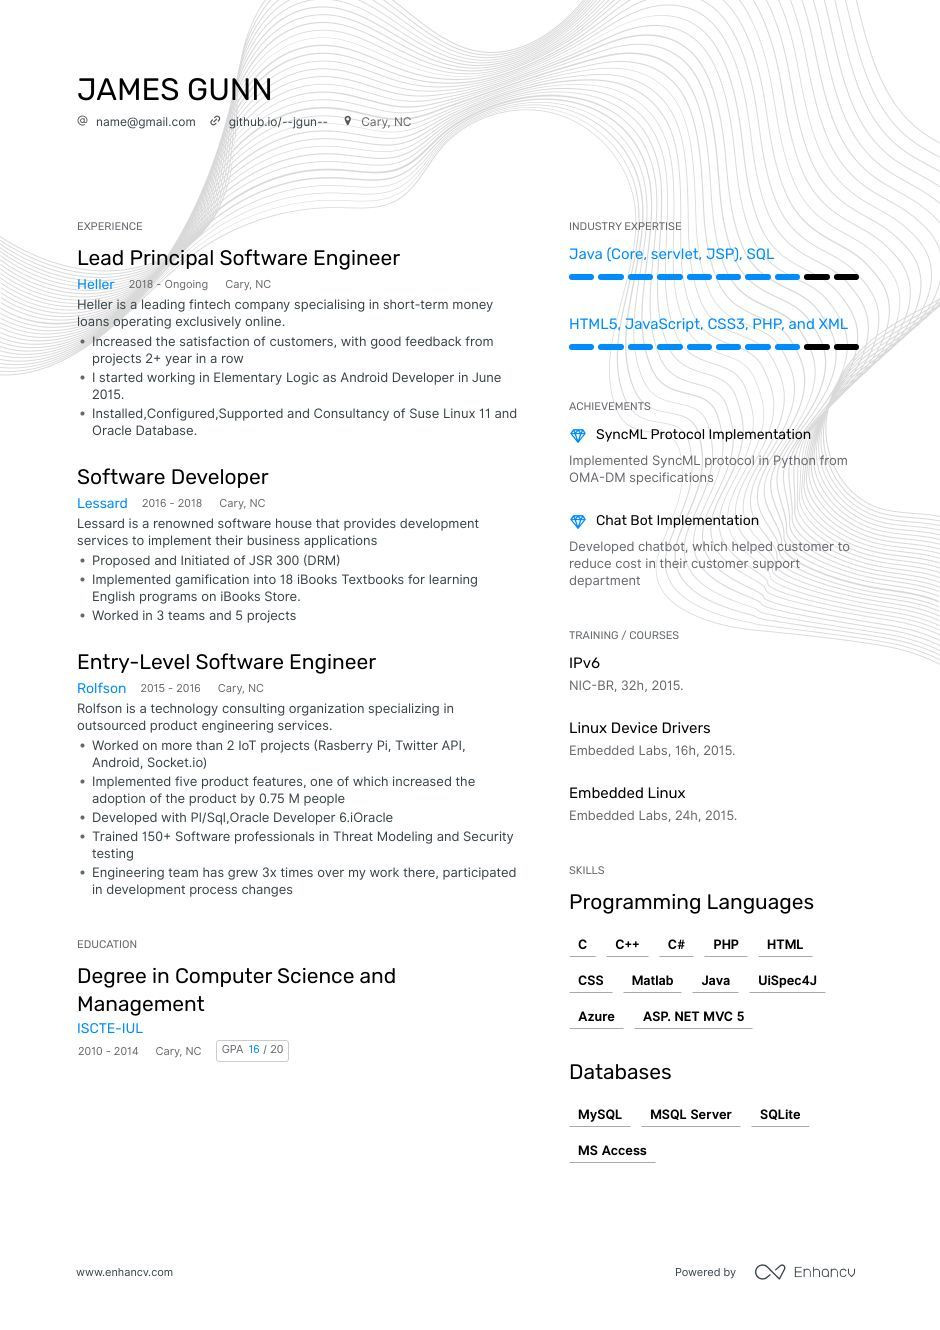 Sample 2 Page Resume software Developer 15 Years Experience software Engineer Resume Examples & Guide for 2022 (layout, Skills …